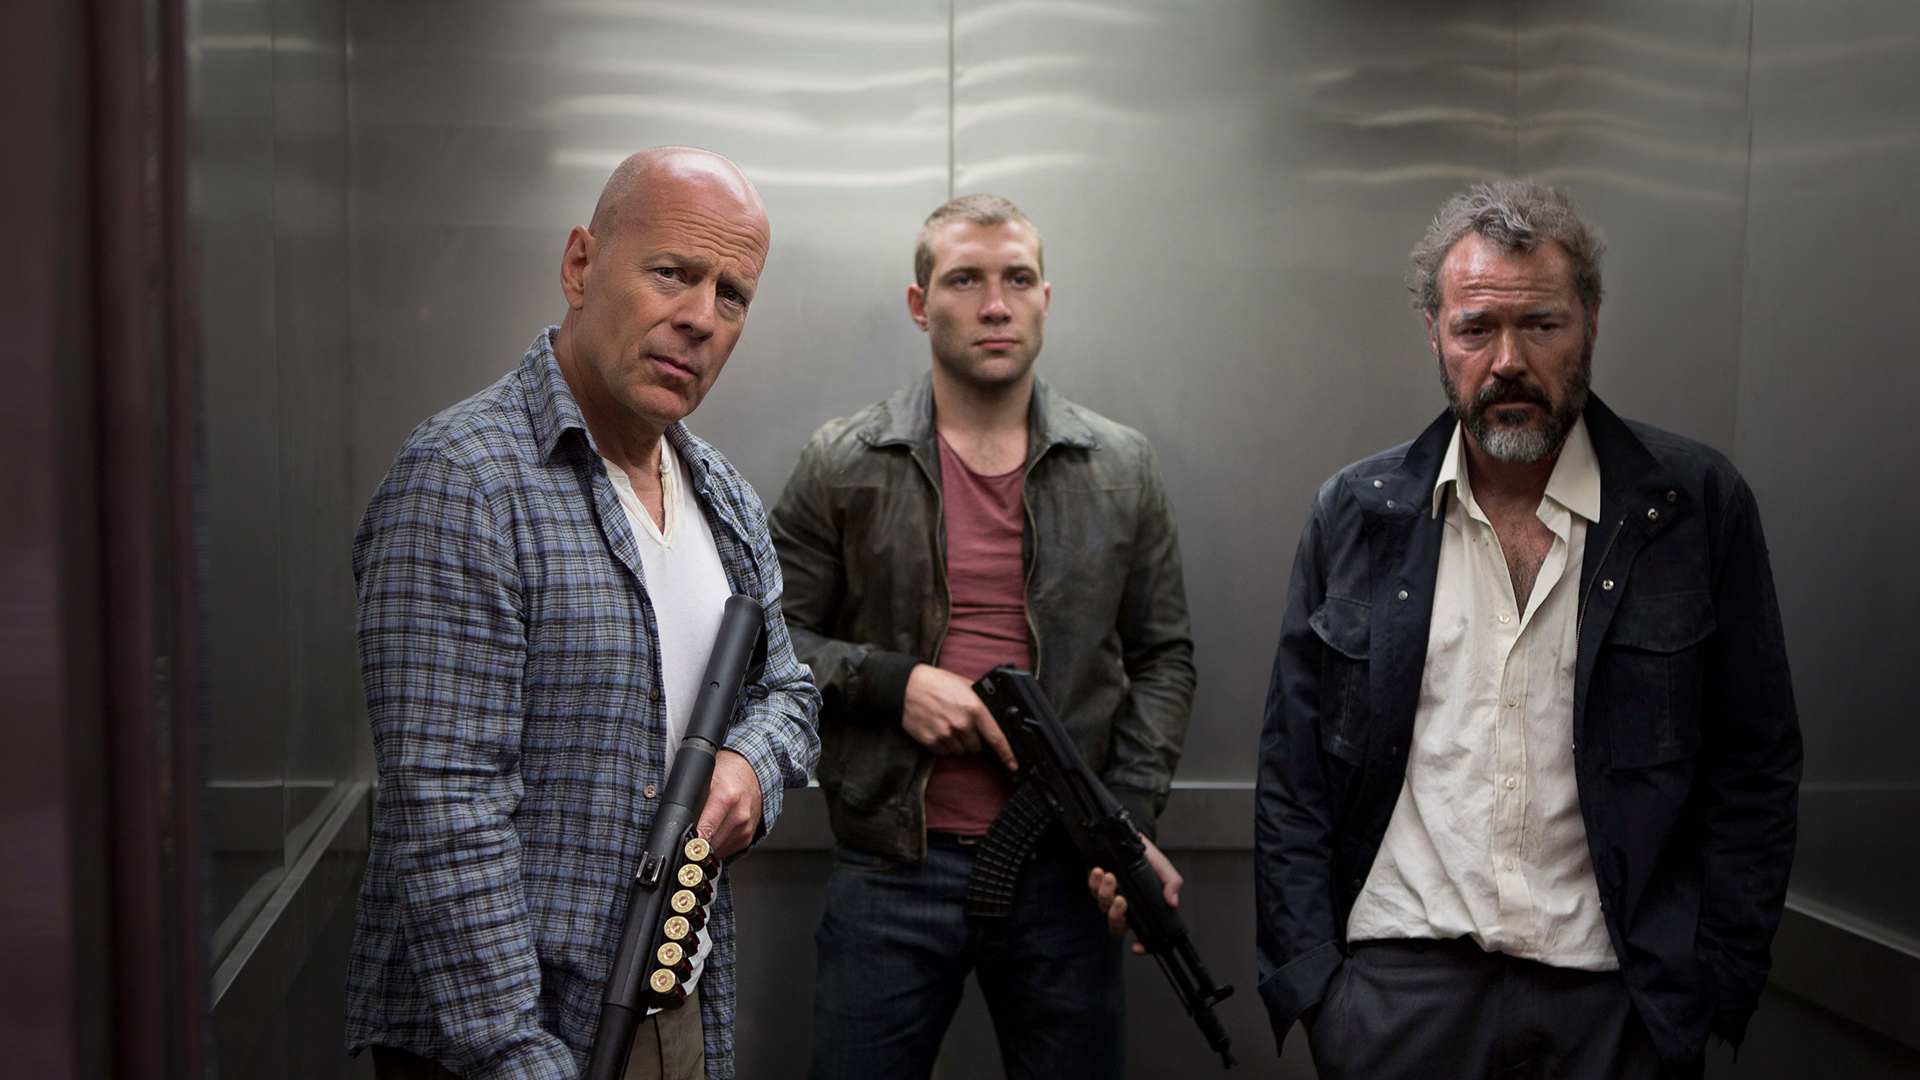 A Good Day To Die Hard #3